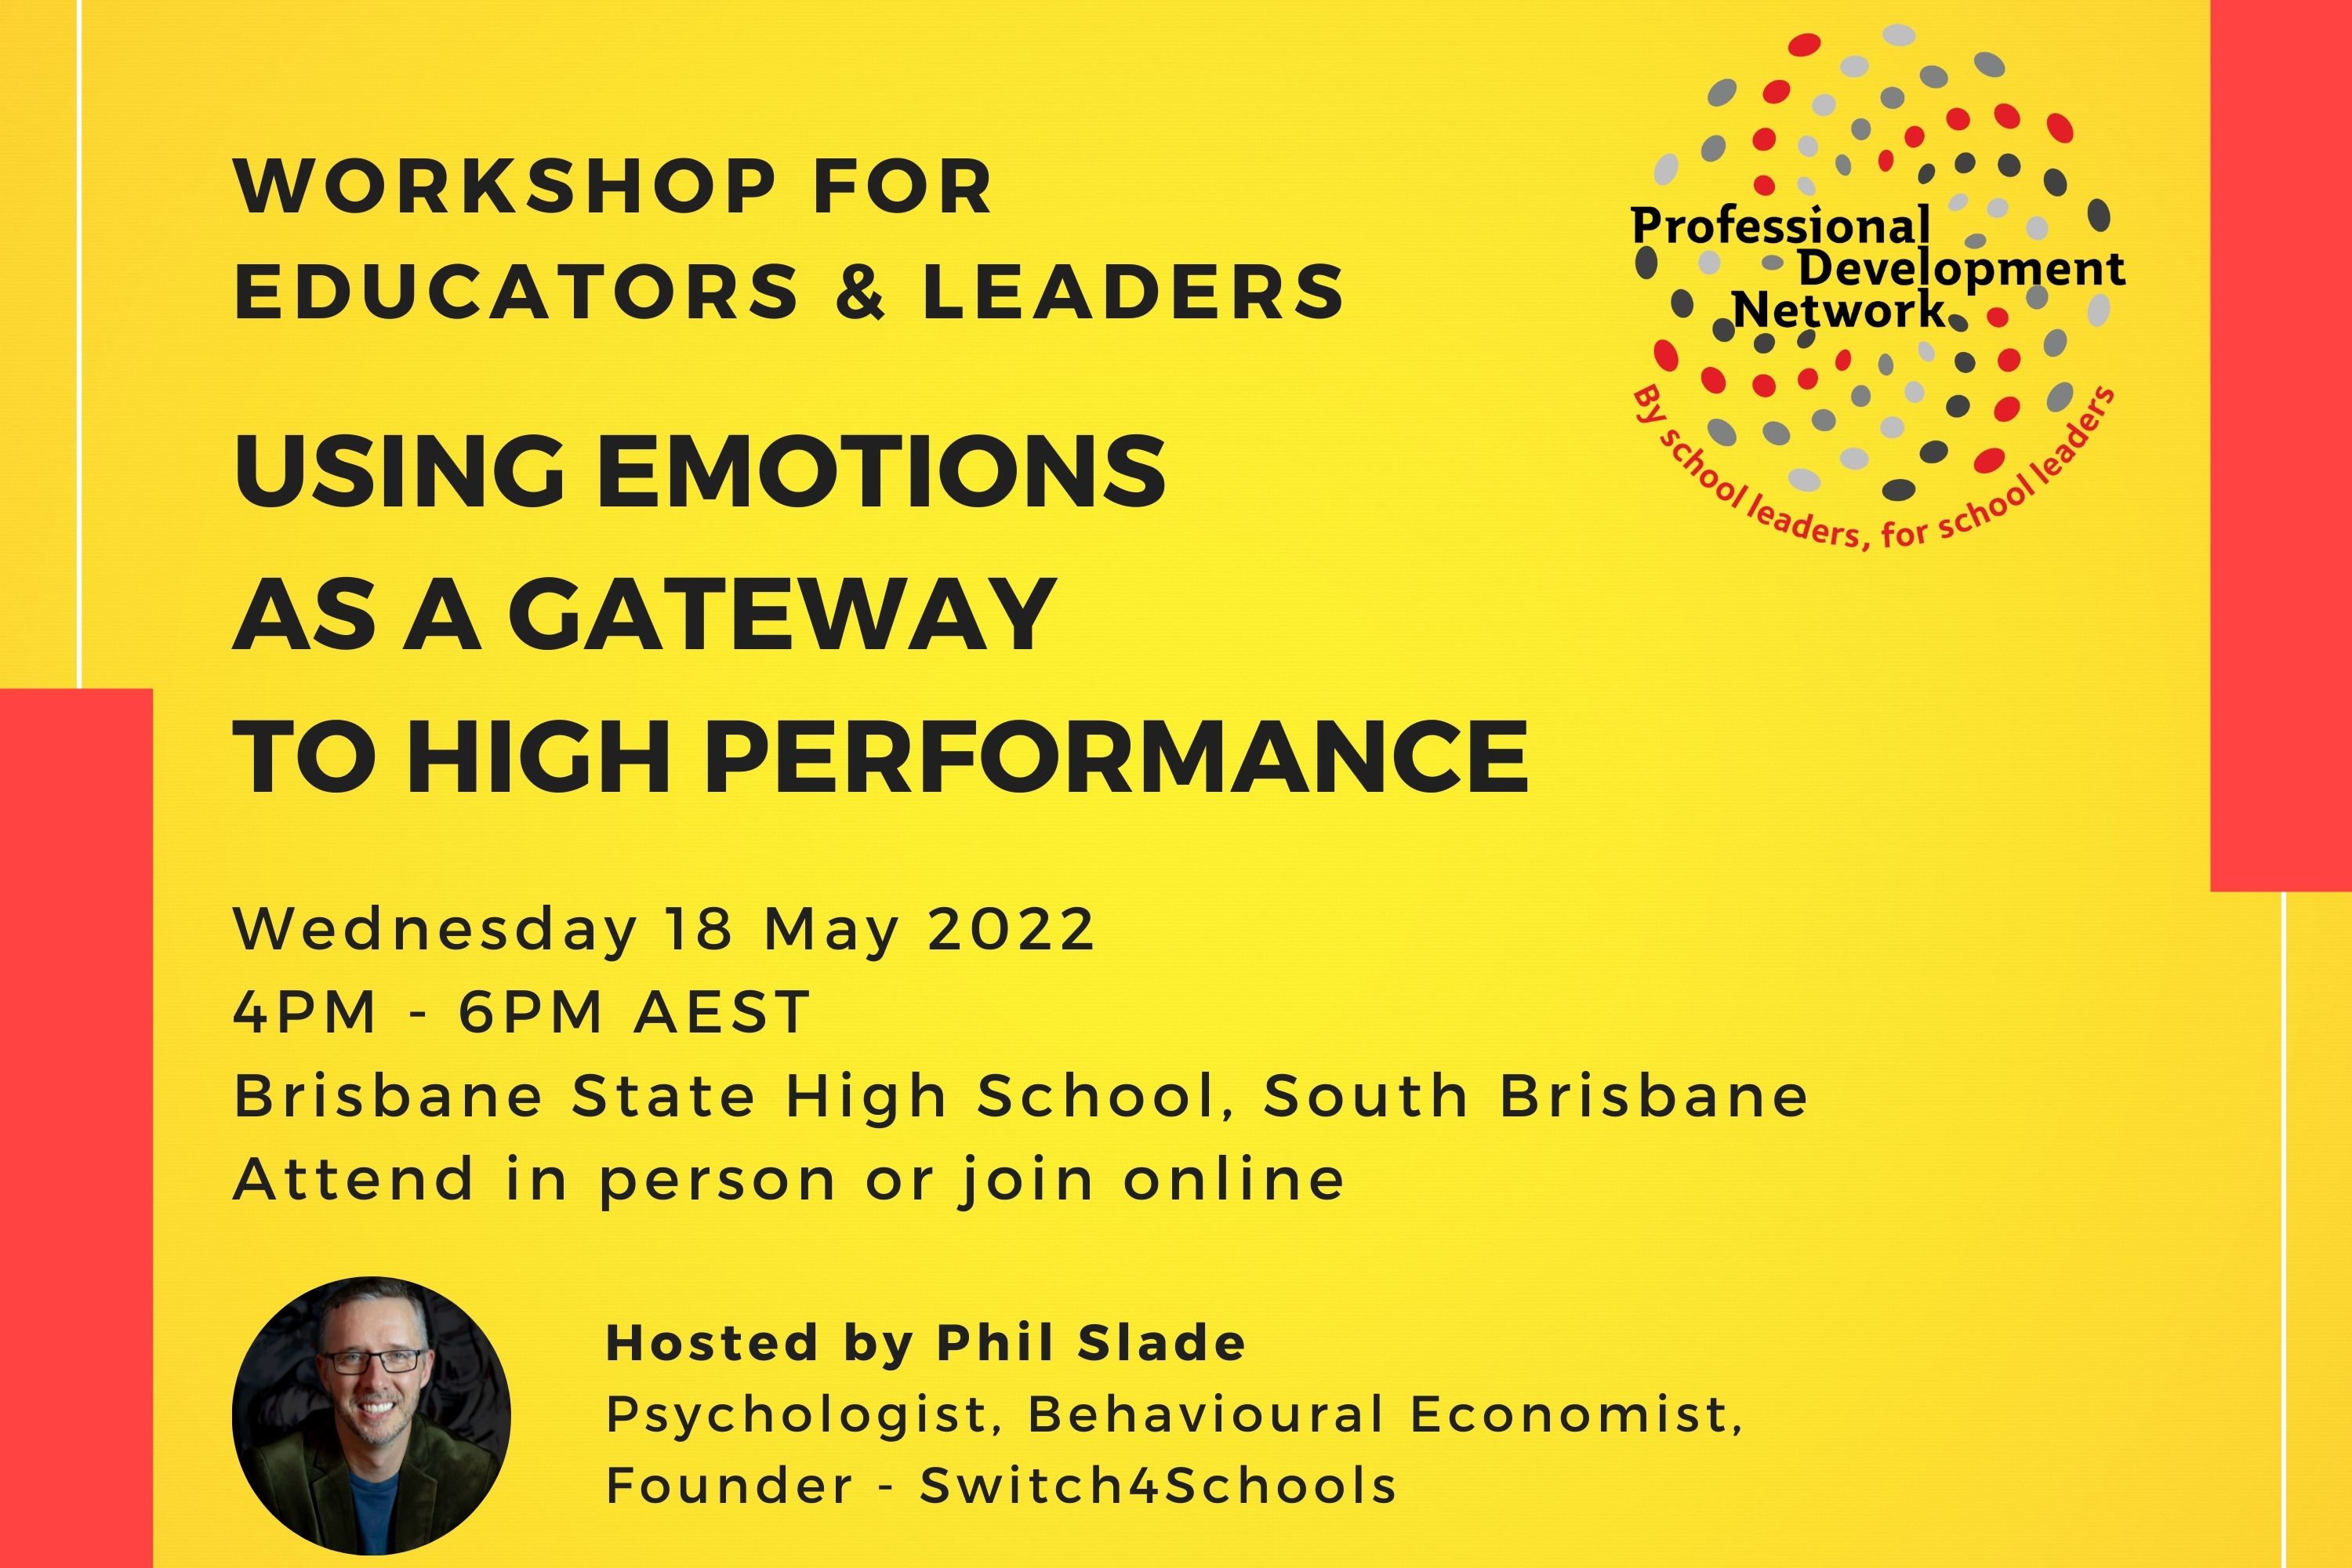 PDN Workshop - Using Emotions as a Gateway to High Performance